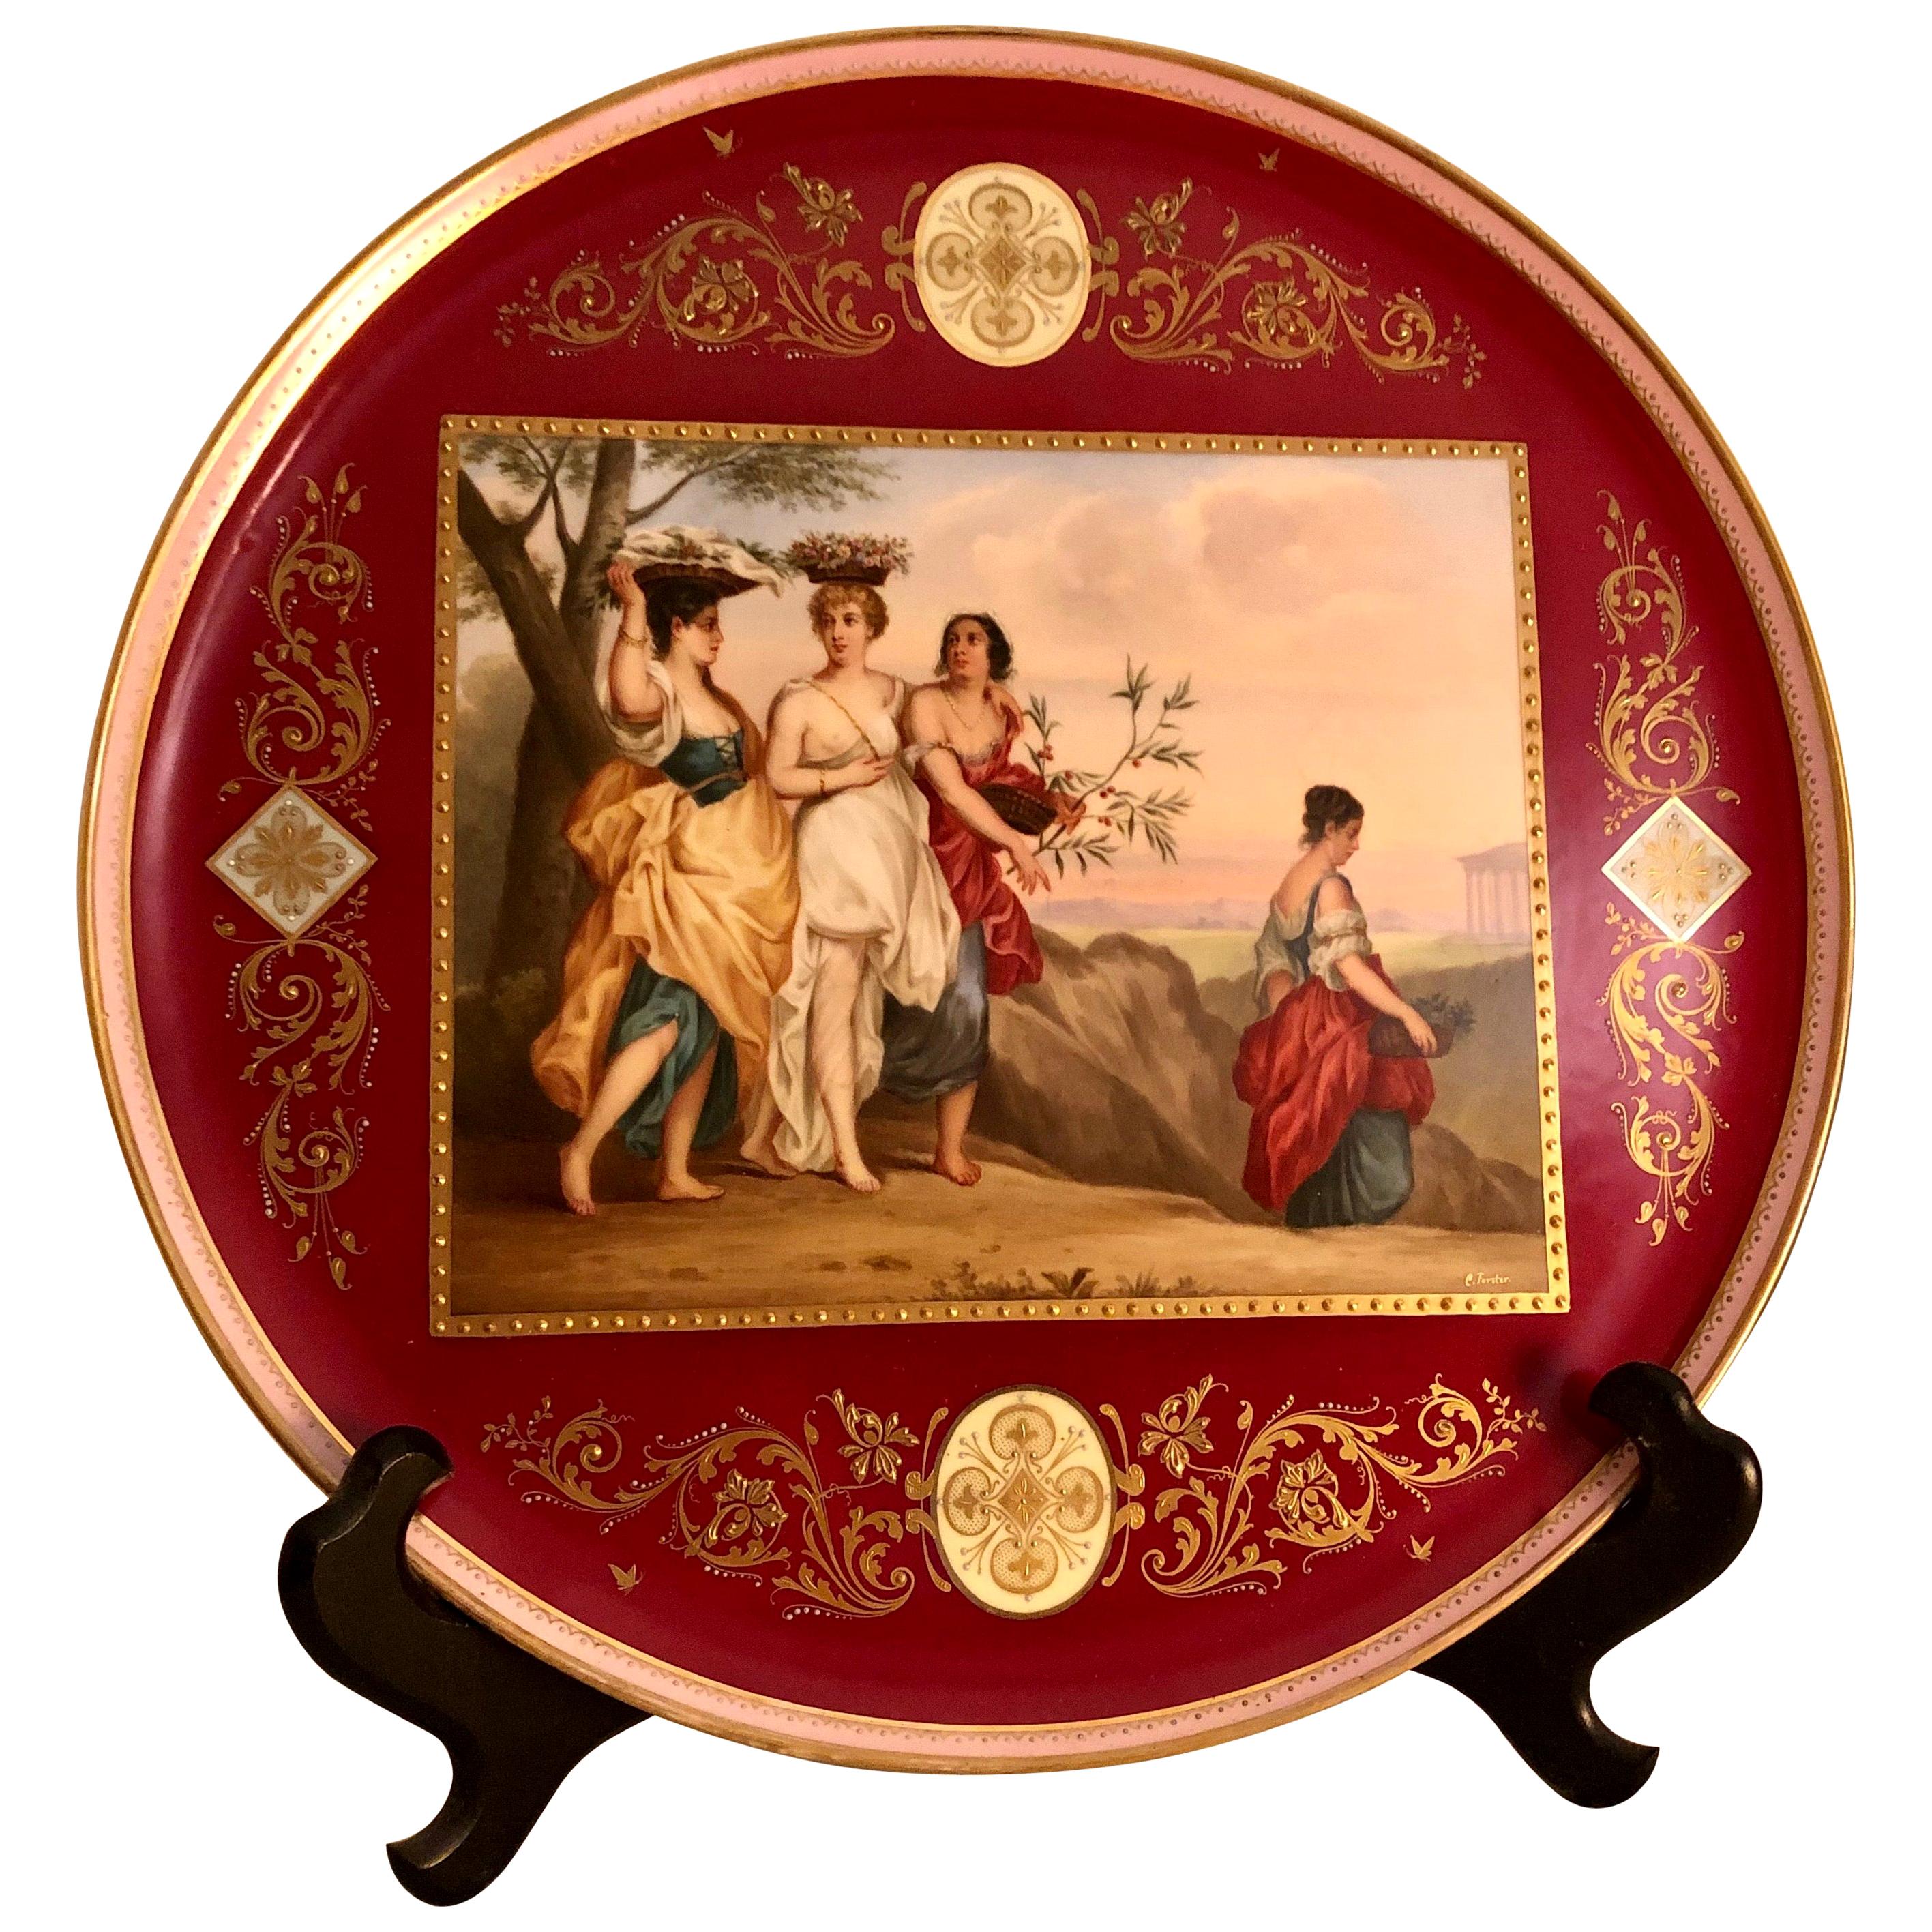 "Royal Vienna” Plaque Painted with 4 Ladies with Flower Baskets on Their Heads